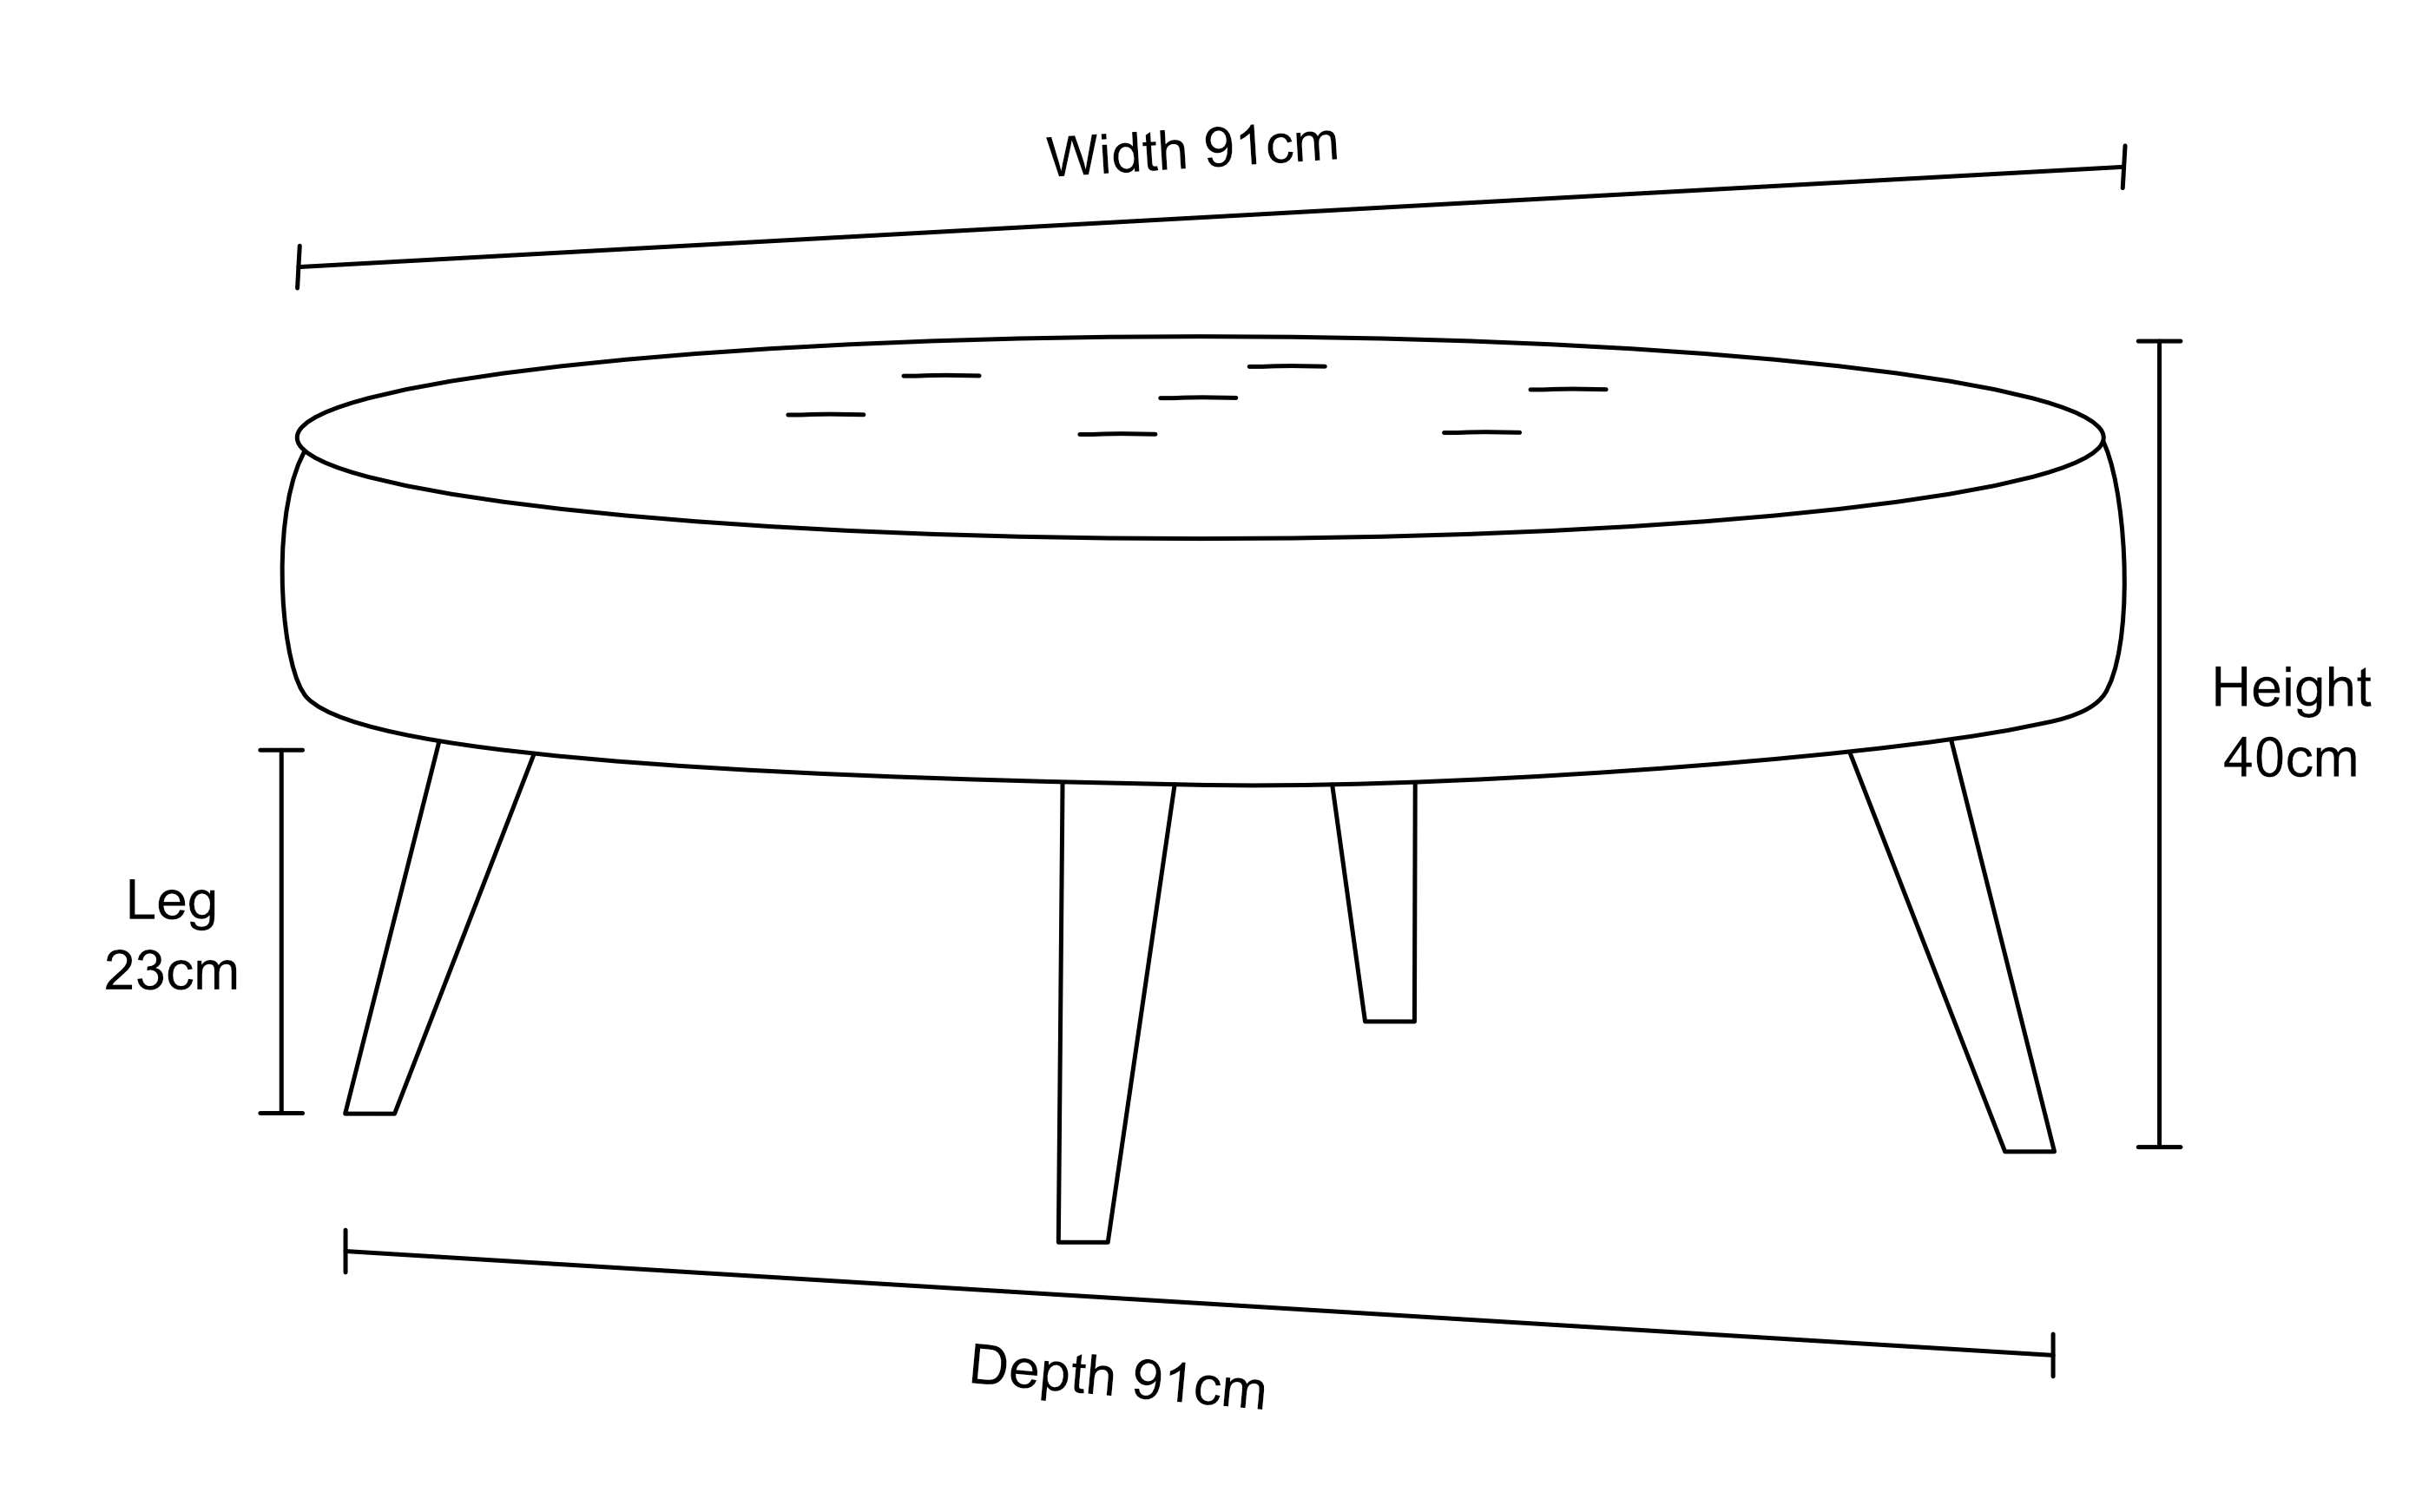 https://www.footstools.co.uk/wp-content/uploads/round-footstool-36x36-dimensions-2.jpg